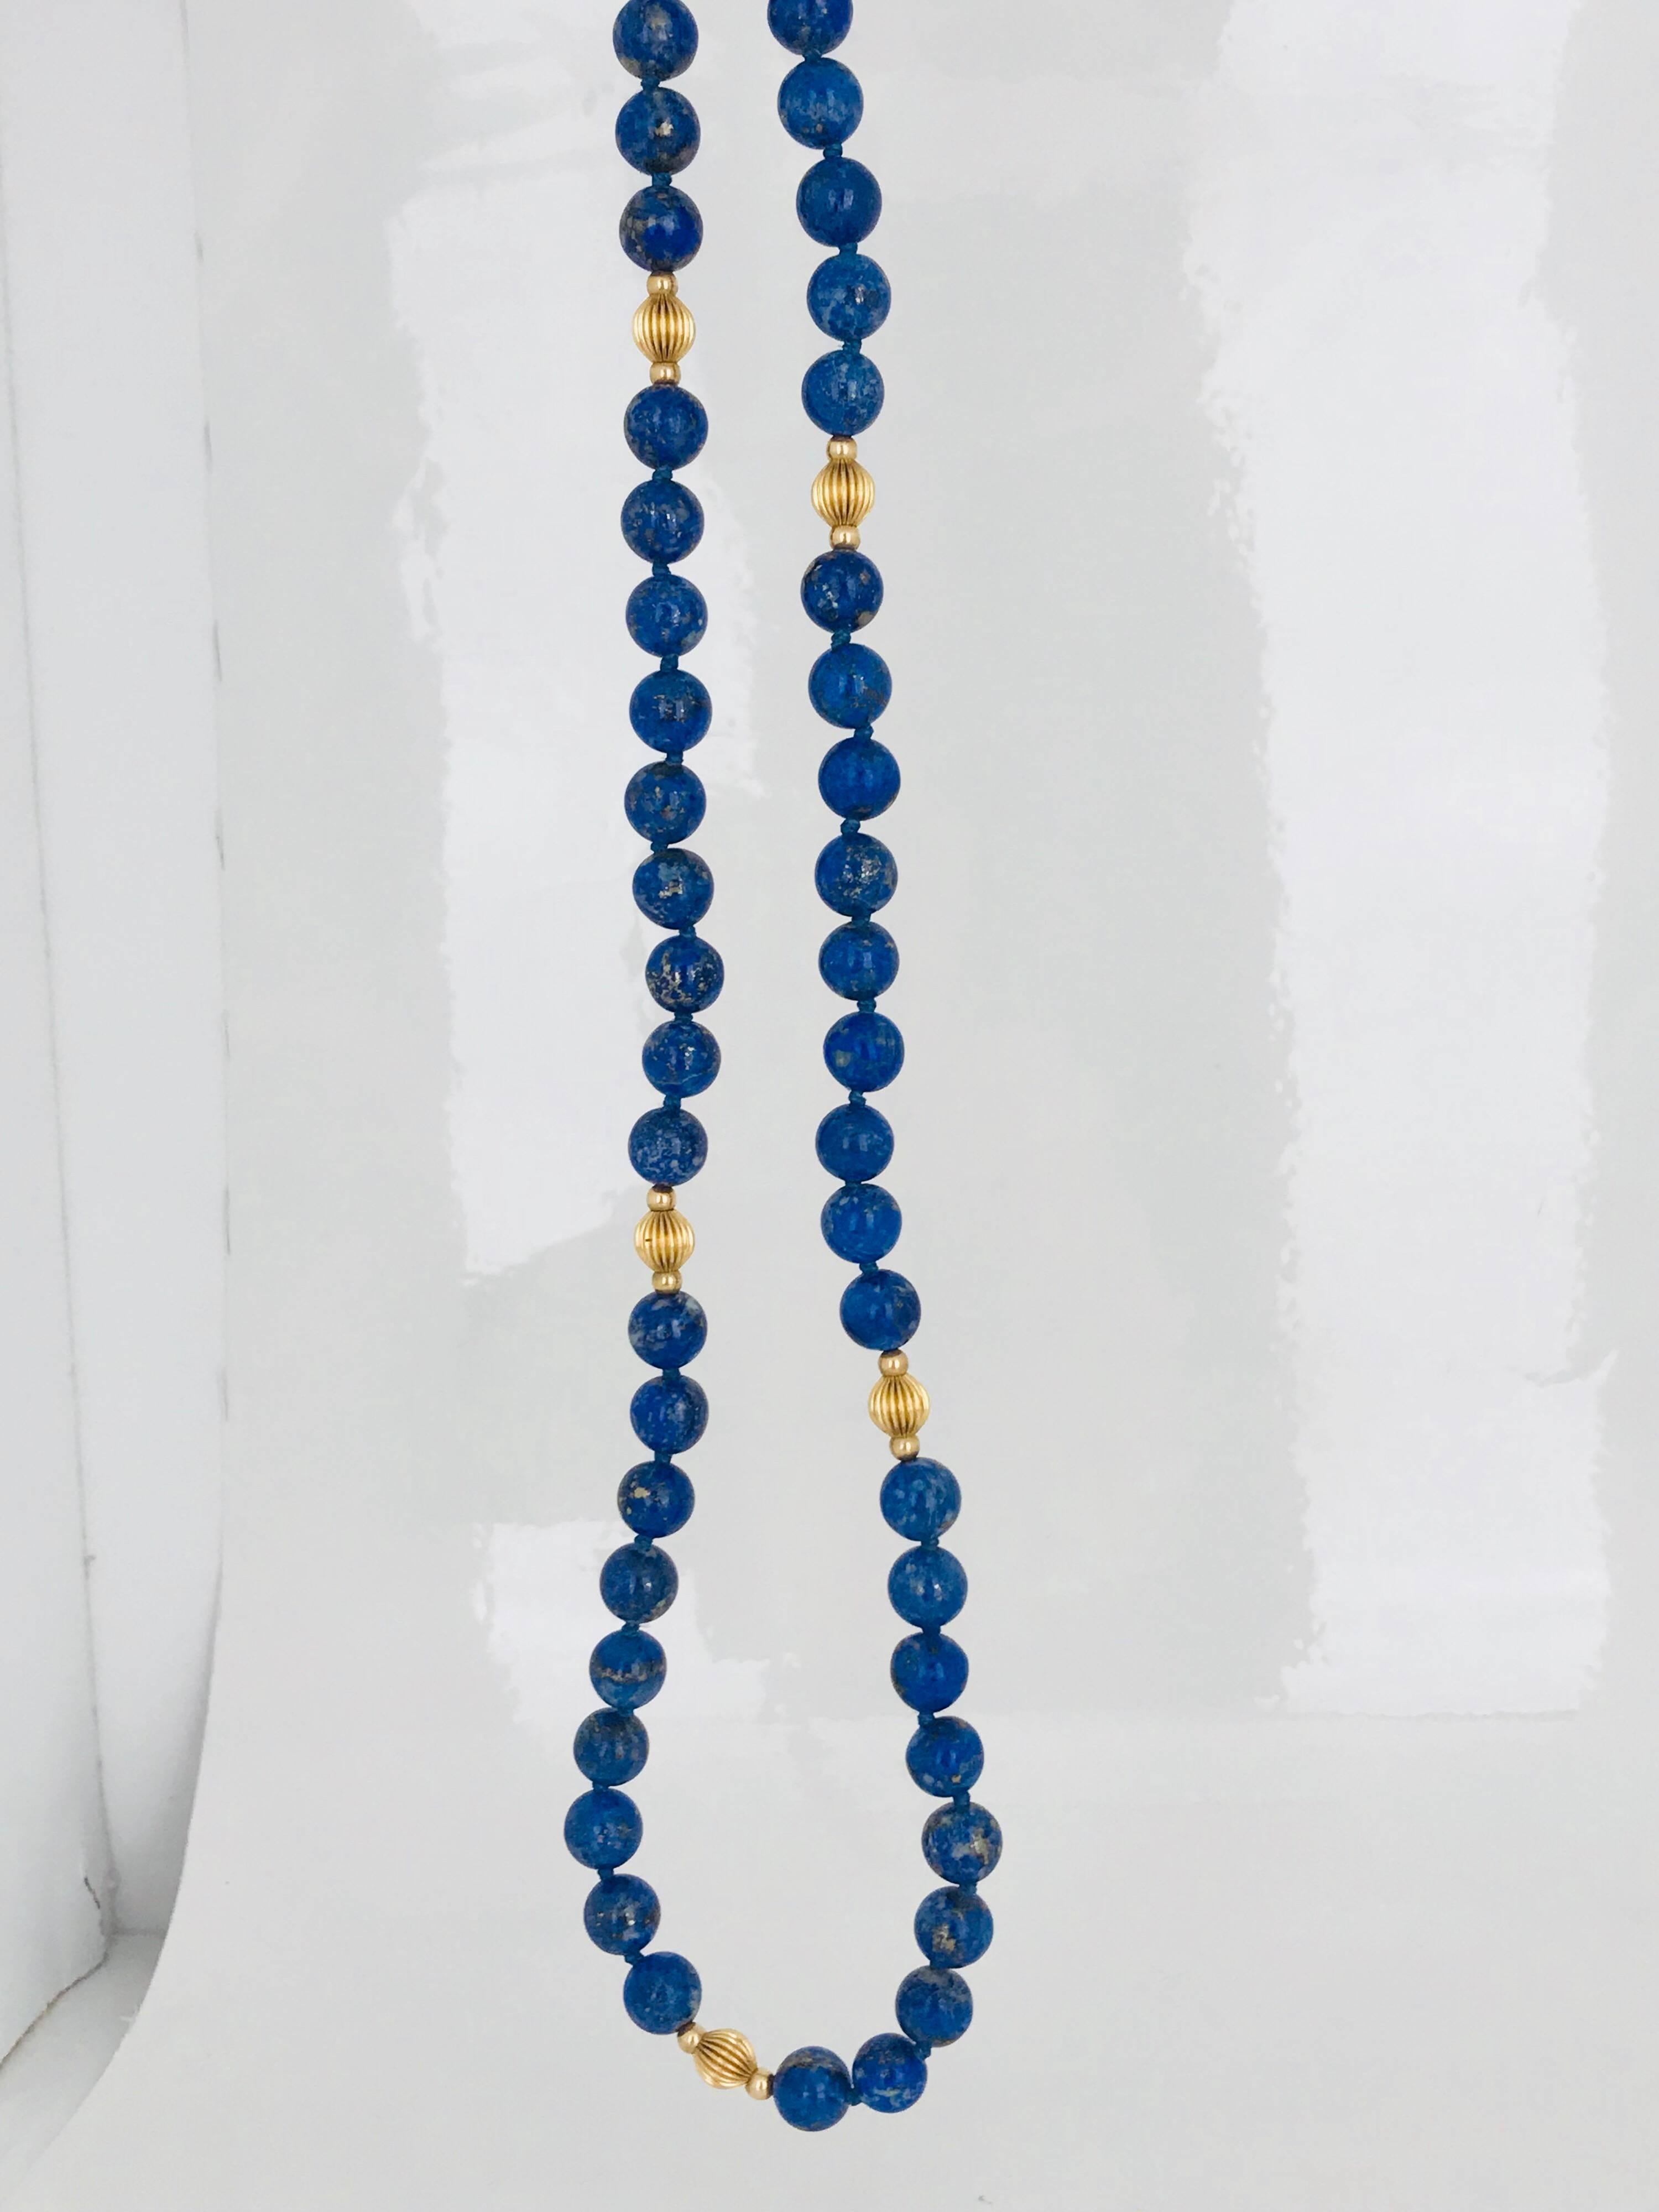 24 inch length, Lapis Lazuli strand of 7.80 millimeter beads. The strand consists of 5 groups of 14 karat yellow gold beads measuring 6 millimeter center, accented by 3 millimeter sides.

GIA Gemologist, inspected & evaluated

